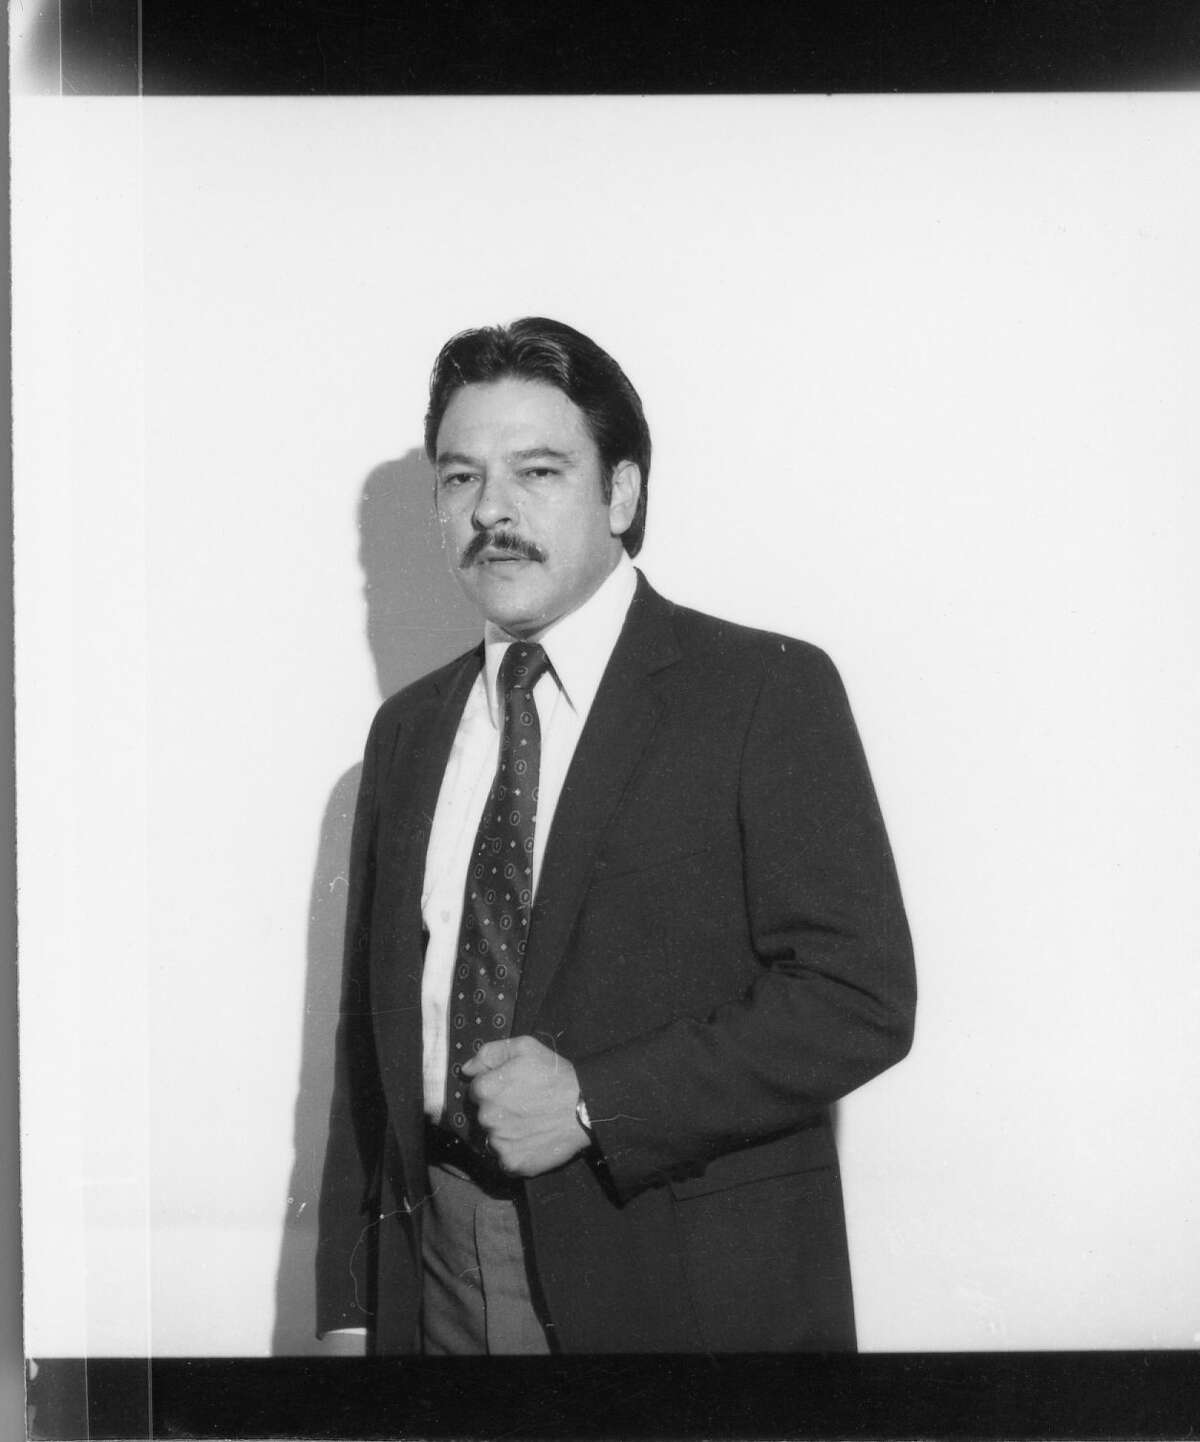 The late Willie Velasquez, founder and president of the Southwest Voter Registration Education Project, Photo courtesy of SVREP